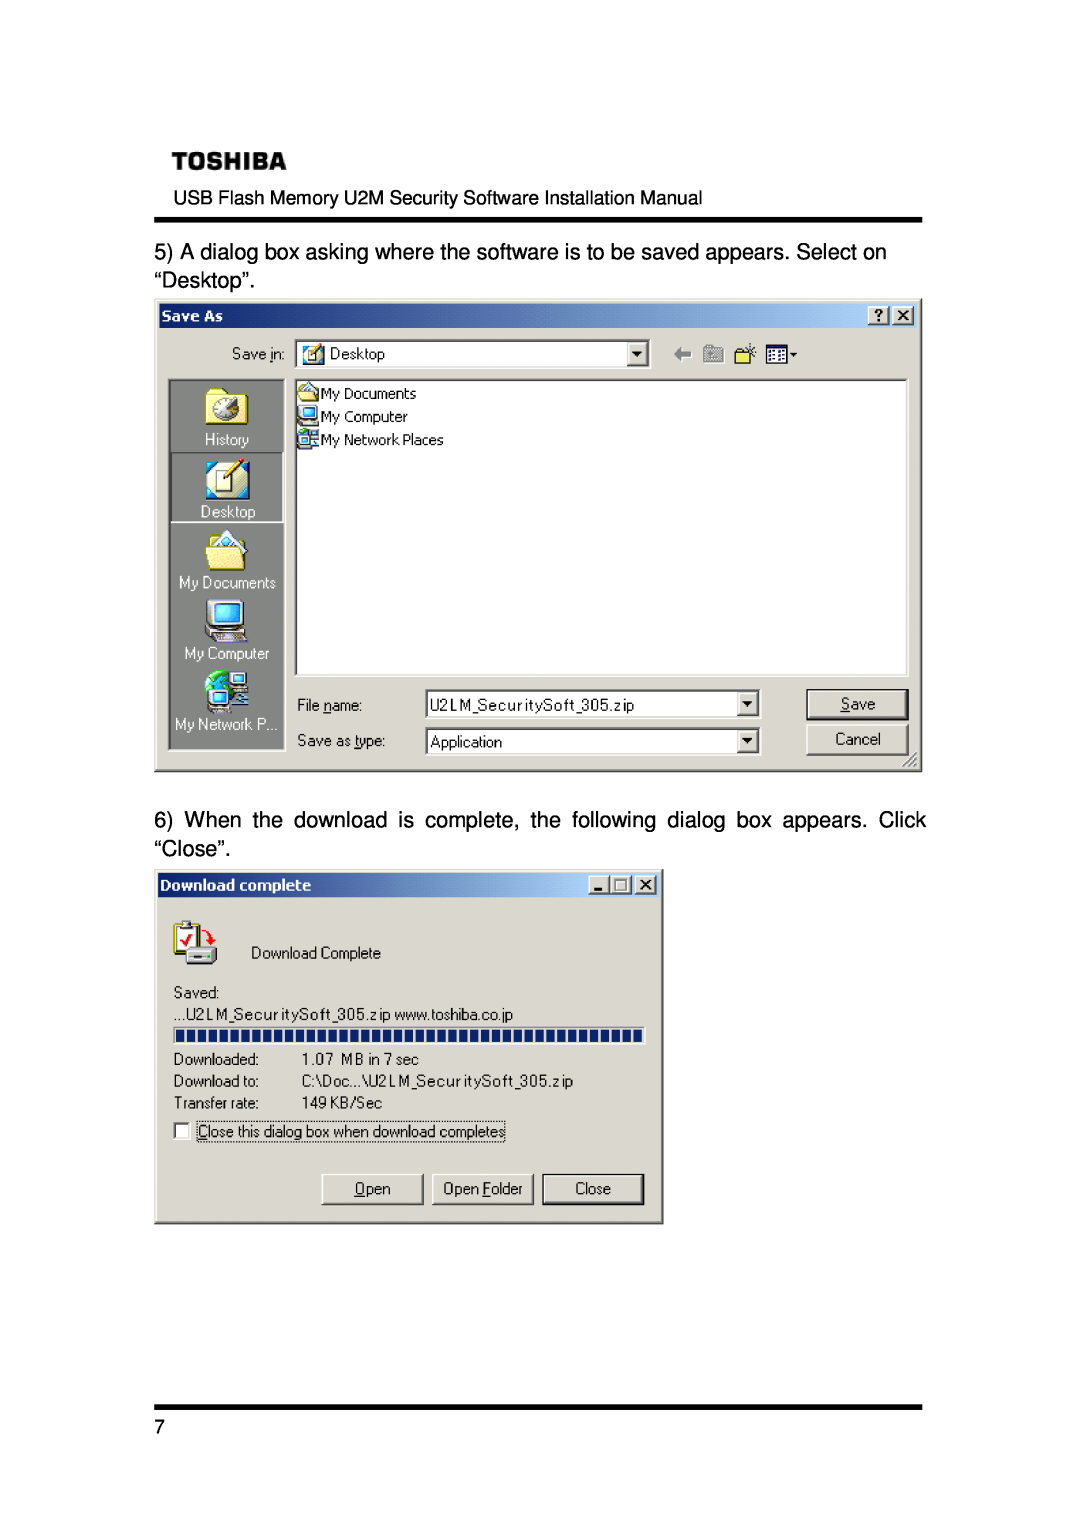 Toshiba U2M-004GT, U2M-016GT, U2M-008GT A dialog box asking where the software is to be saved appears. Select on “Desktop” 